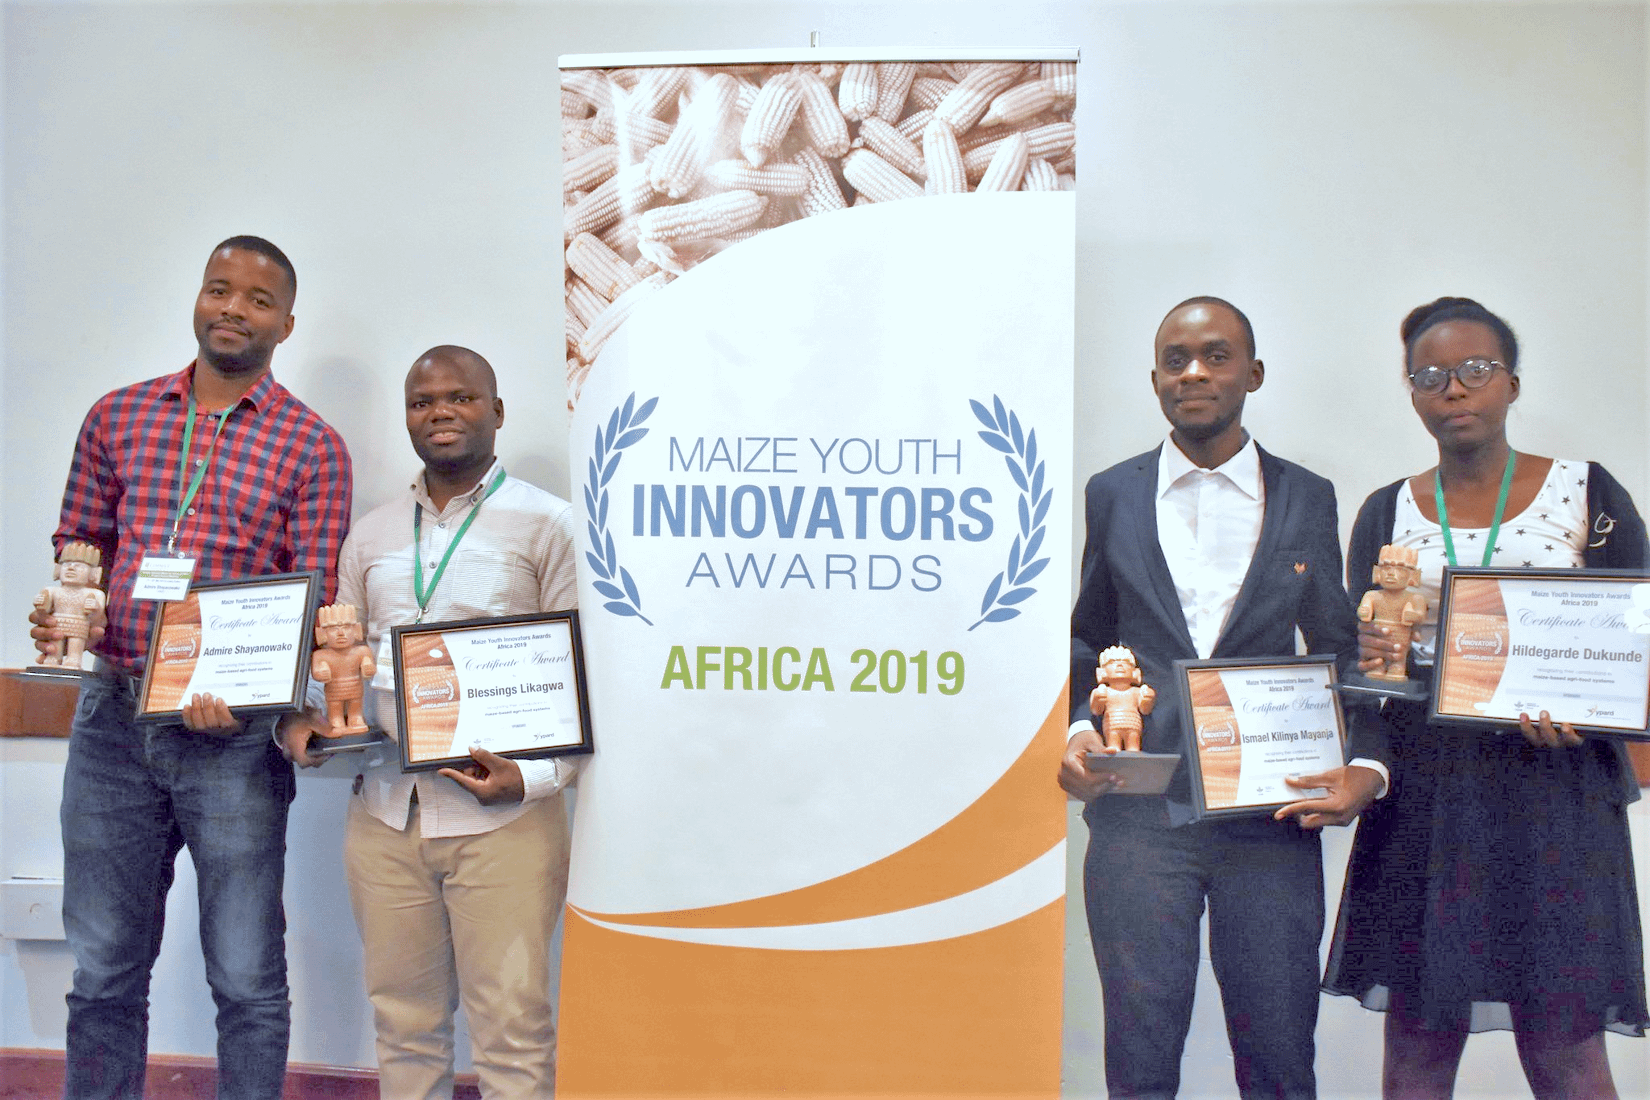 Winners of the 2019 MAIZE Youth Innovators Awards – Africa receive their awards at the STMA meeting in Lusaka, Zambia. From left to right: Admire Shayanowako, Blessings Likagwa, Ismael Mayanja and Hildegarde Dukunde. Fifth awardee Mila Lokwa Giresse not pictured. (Photo: J.Bossuet/CIMMYT)